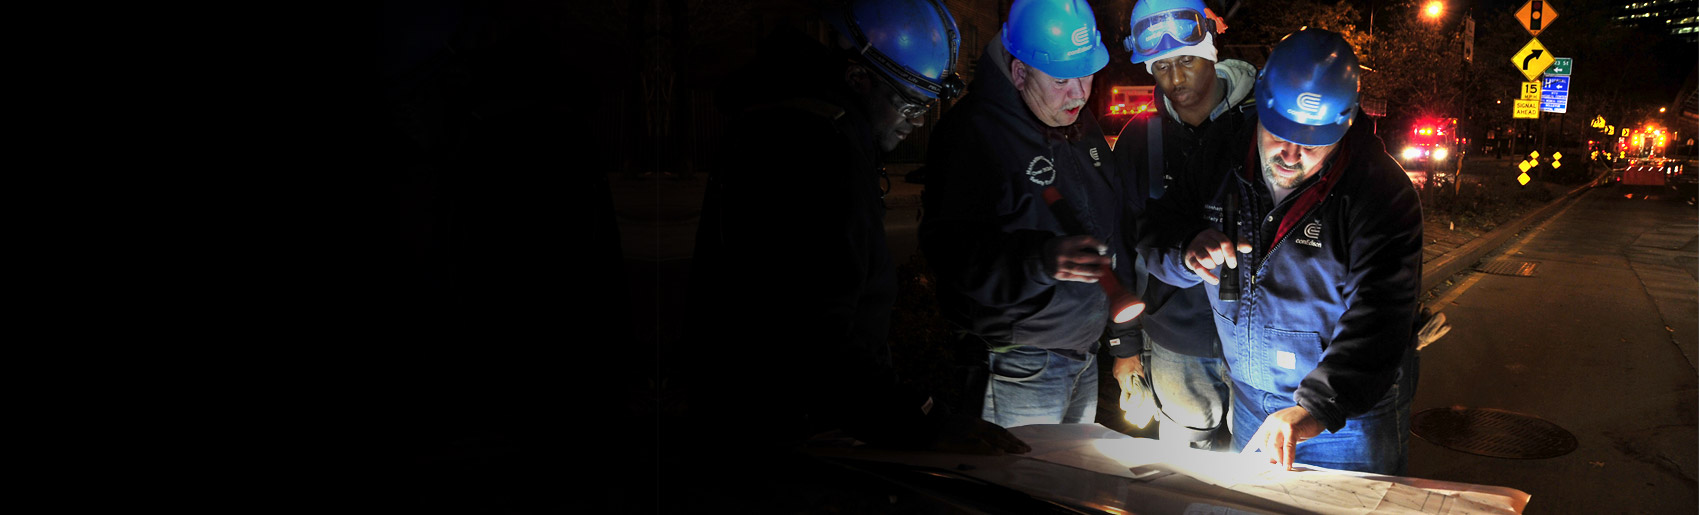 Workers using flashlights to view a diagram.